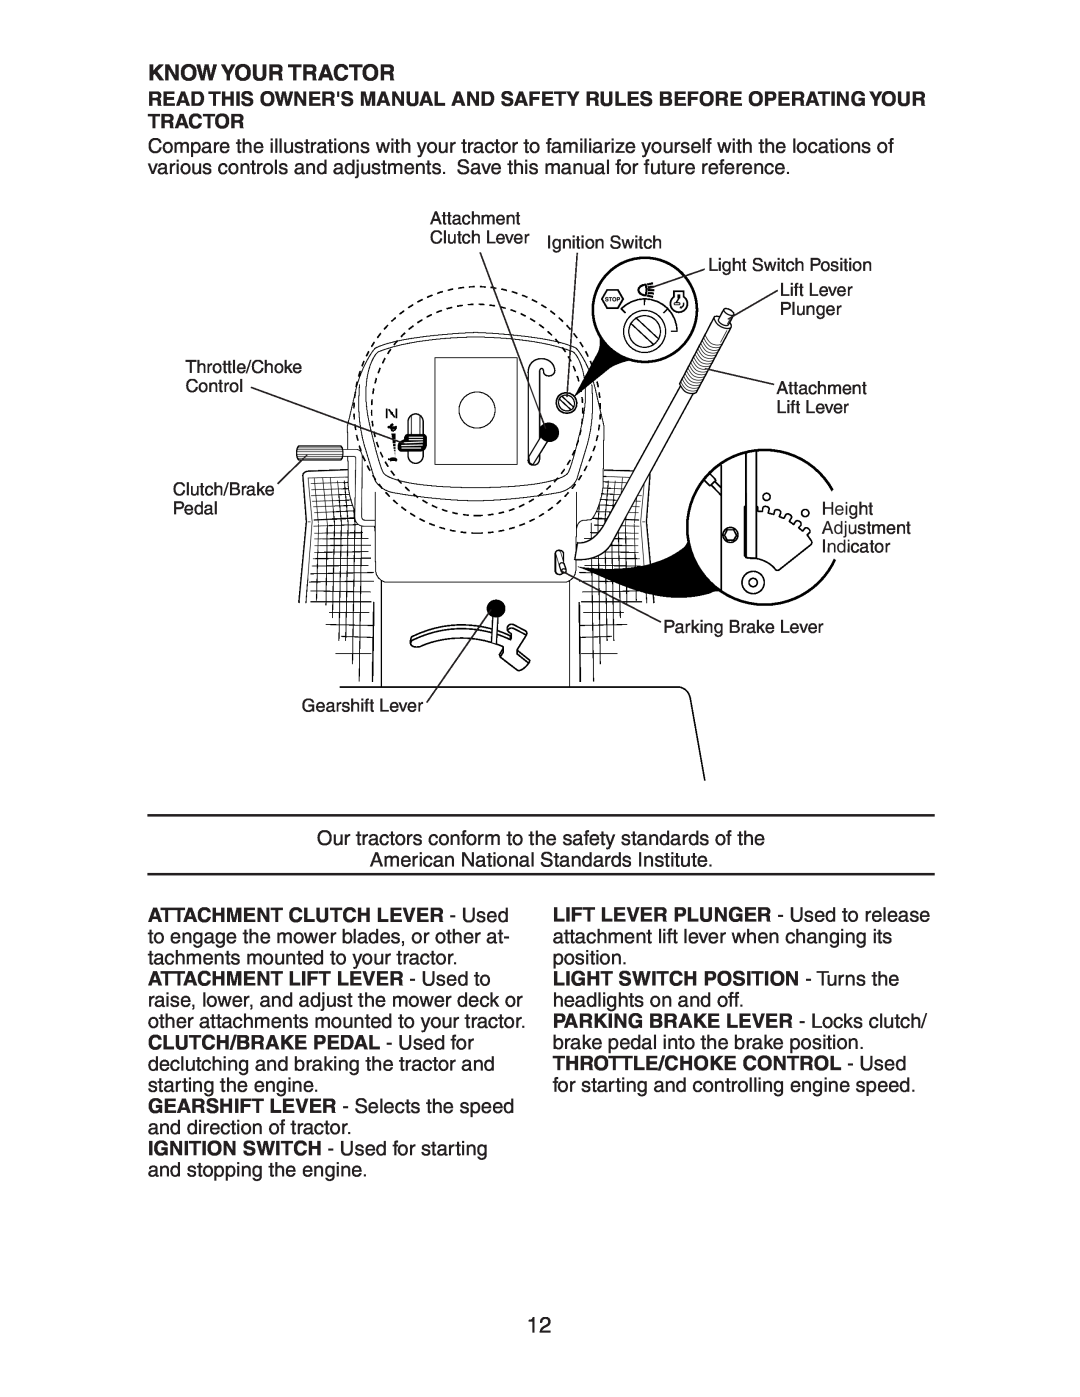 Electrolux AG15538A manual Know Your Tractor, LIGHT SWITCH POSITION - Turns the headlights on and off 